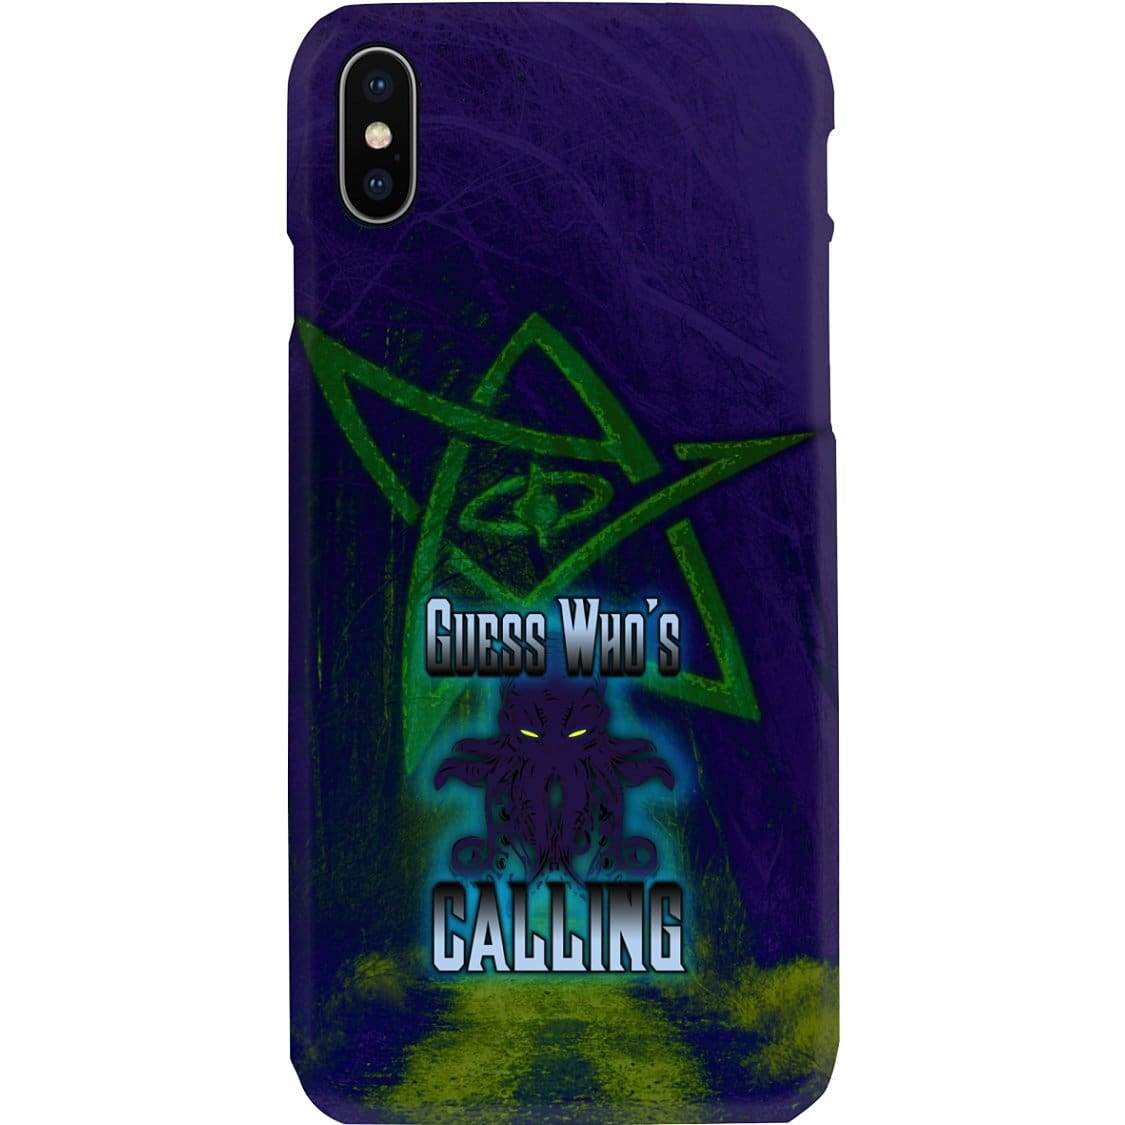 Cthulhu - Guess Who’s Calling Phone Case - Snap * iPhone * Samsung * - iPhone X Case / Gloss / Apparel